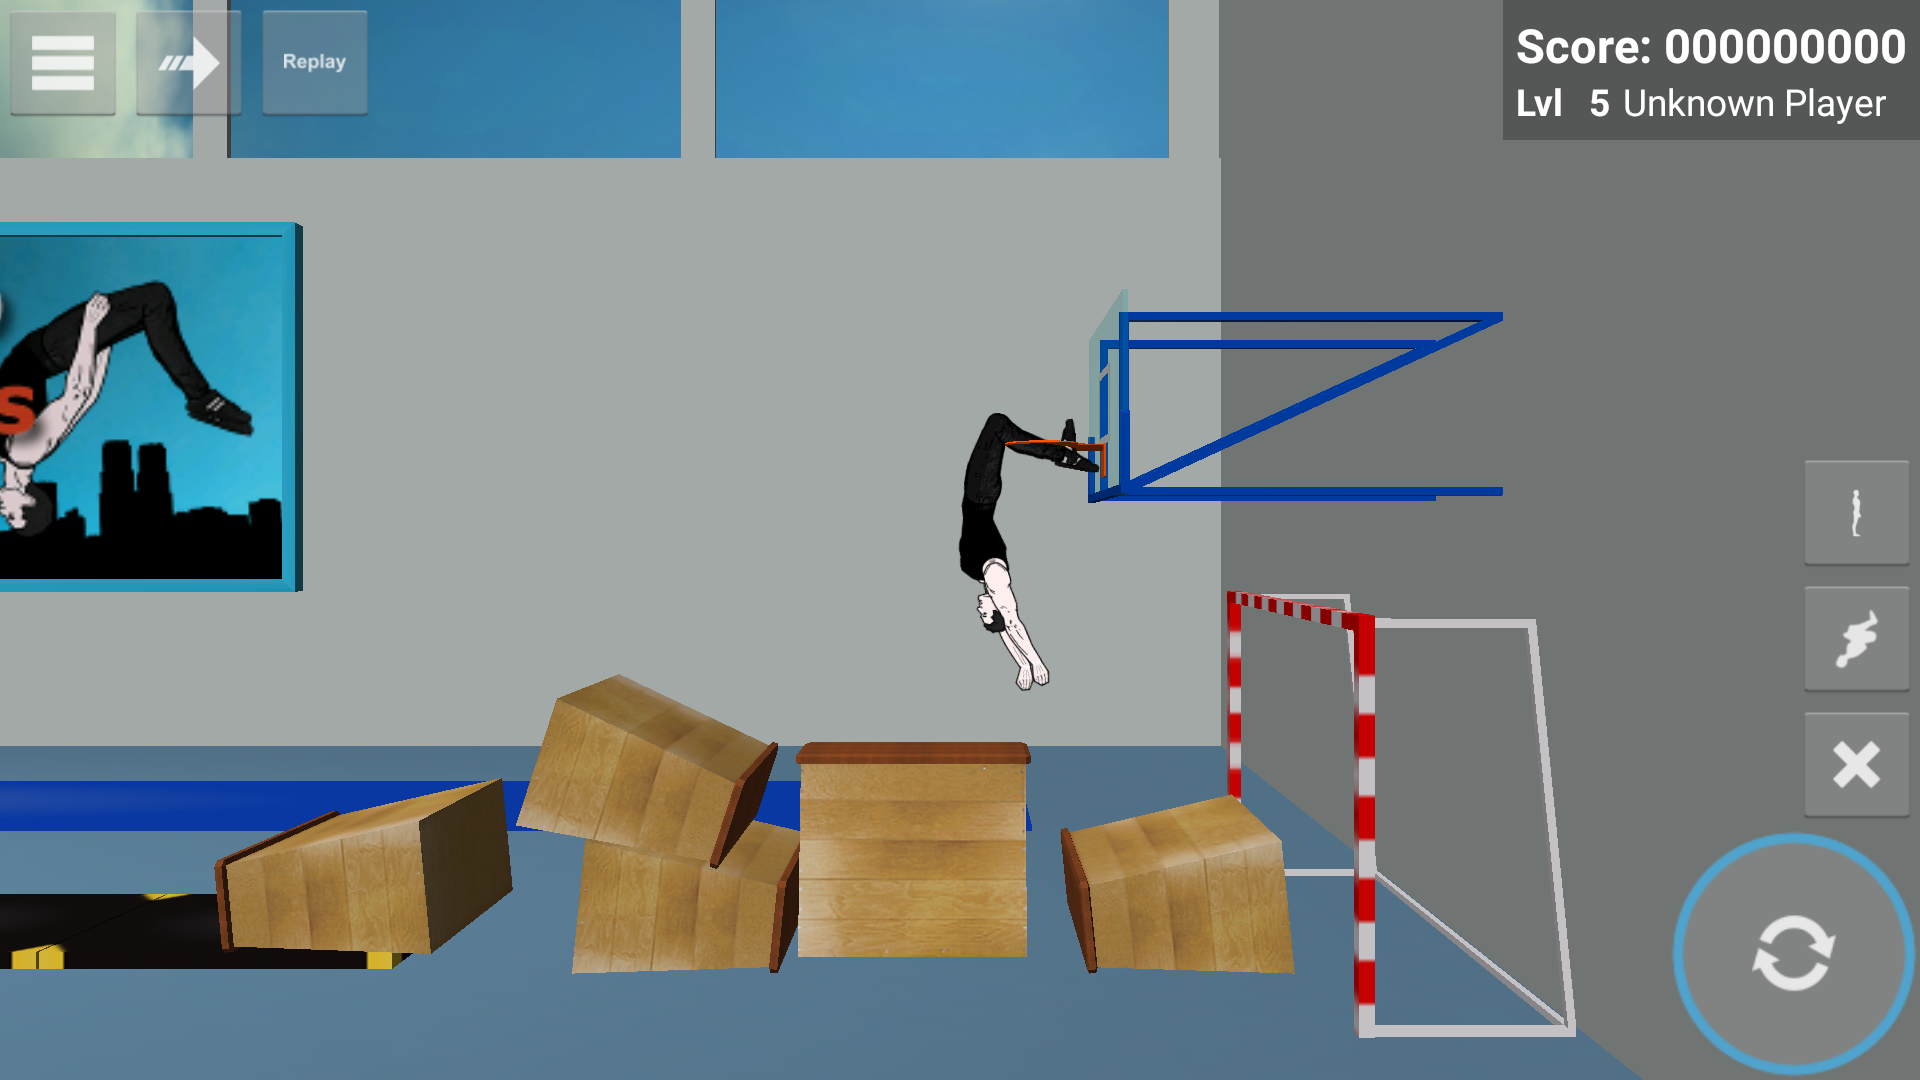 Android application Backflip Madness - Extreme sports flip game screenshort